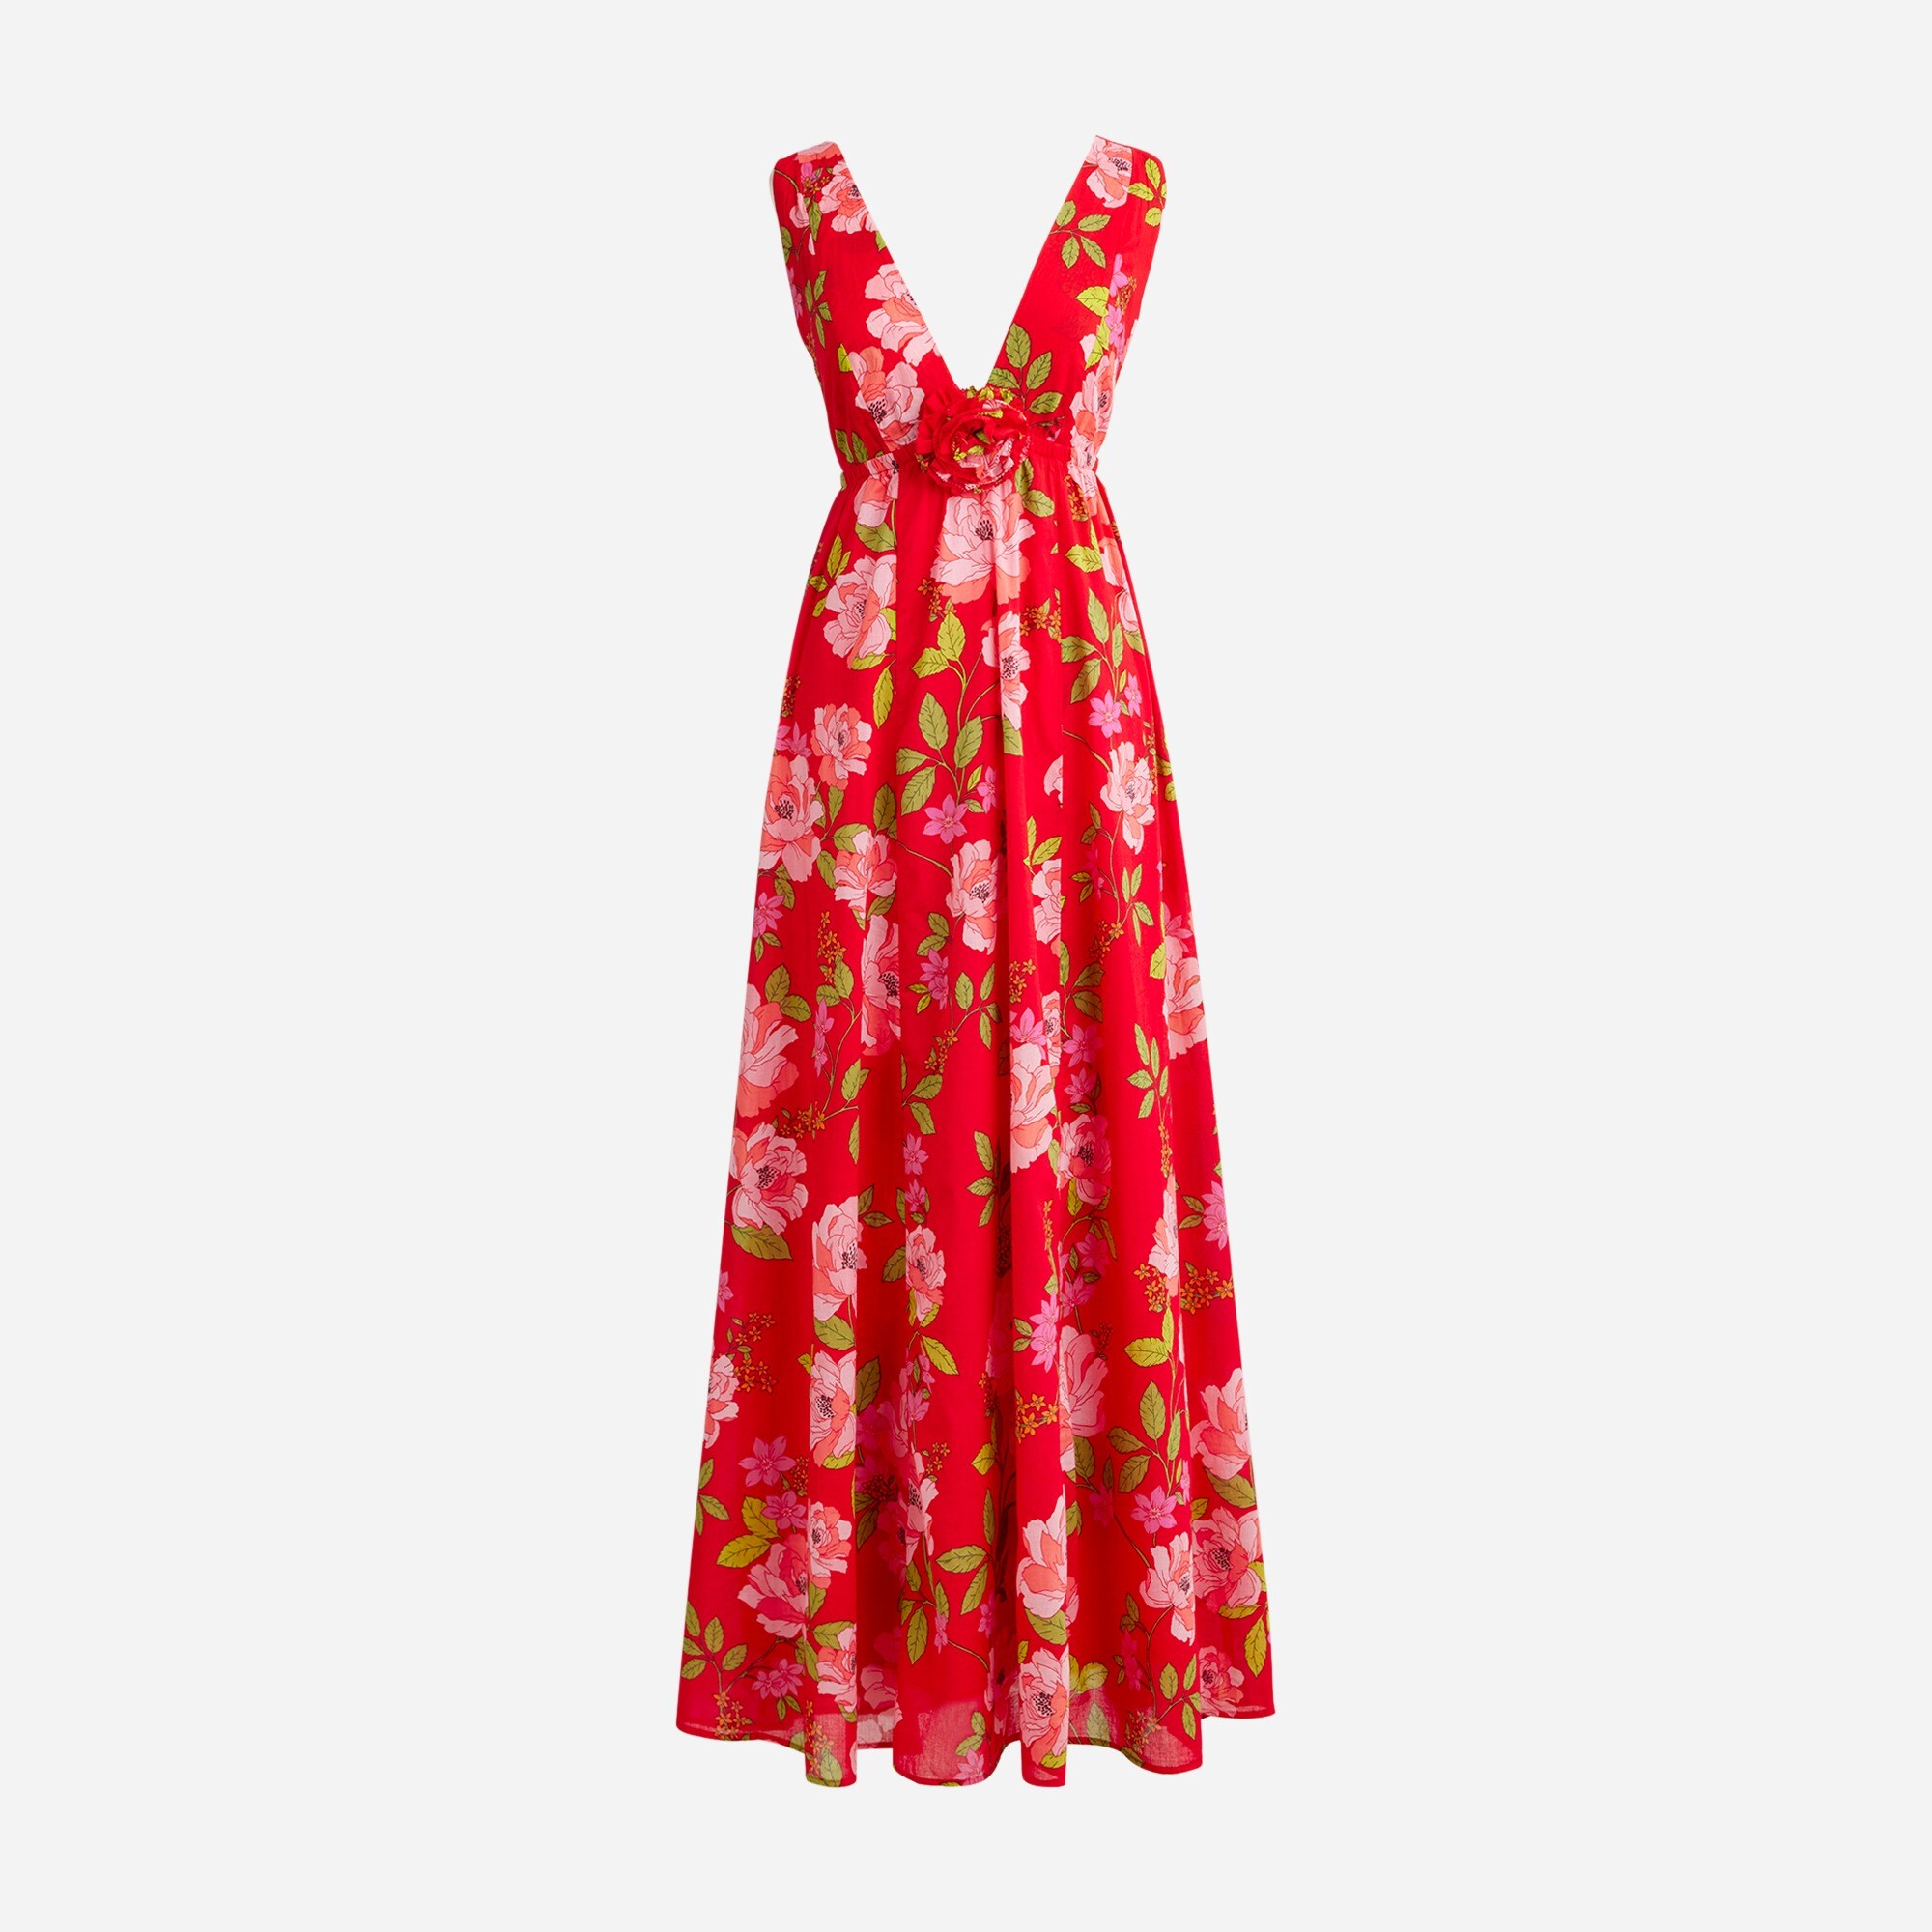  Cotton voile rosette plunge dress in peony vines